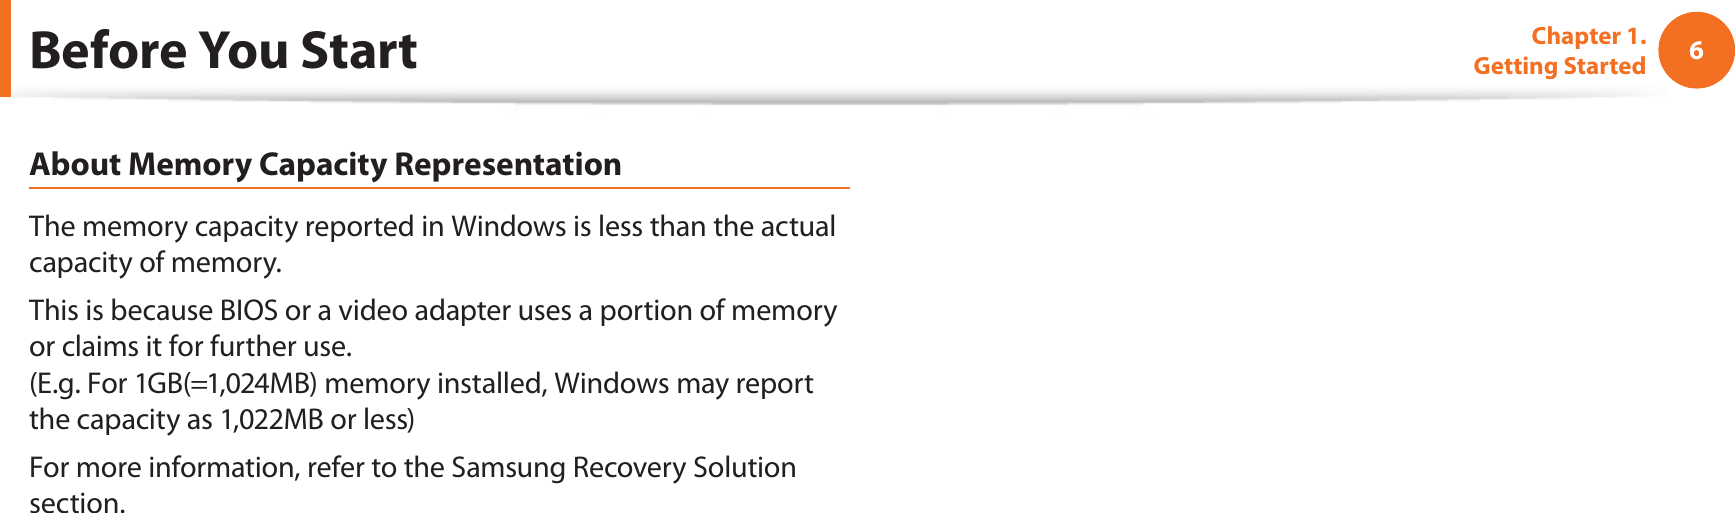 6Chapter 1. Getting StartedAbout Memory Capacity RepresentationThe memory capacity reported in Windows is less than the actual capacity of memory.This is because BIOS or a video adapter uses a portion of memory or claims it for further use. (E.g. For 1GB(=1,024MB) memory installed, Windows may report the capacity as 1,022MB or less)For more information, refer to the Samsung Recovery Solution section.Before You Start